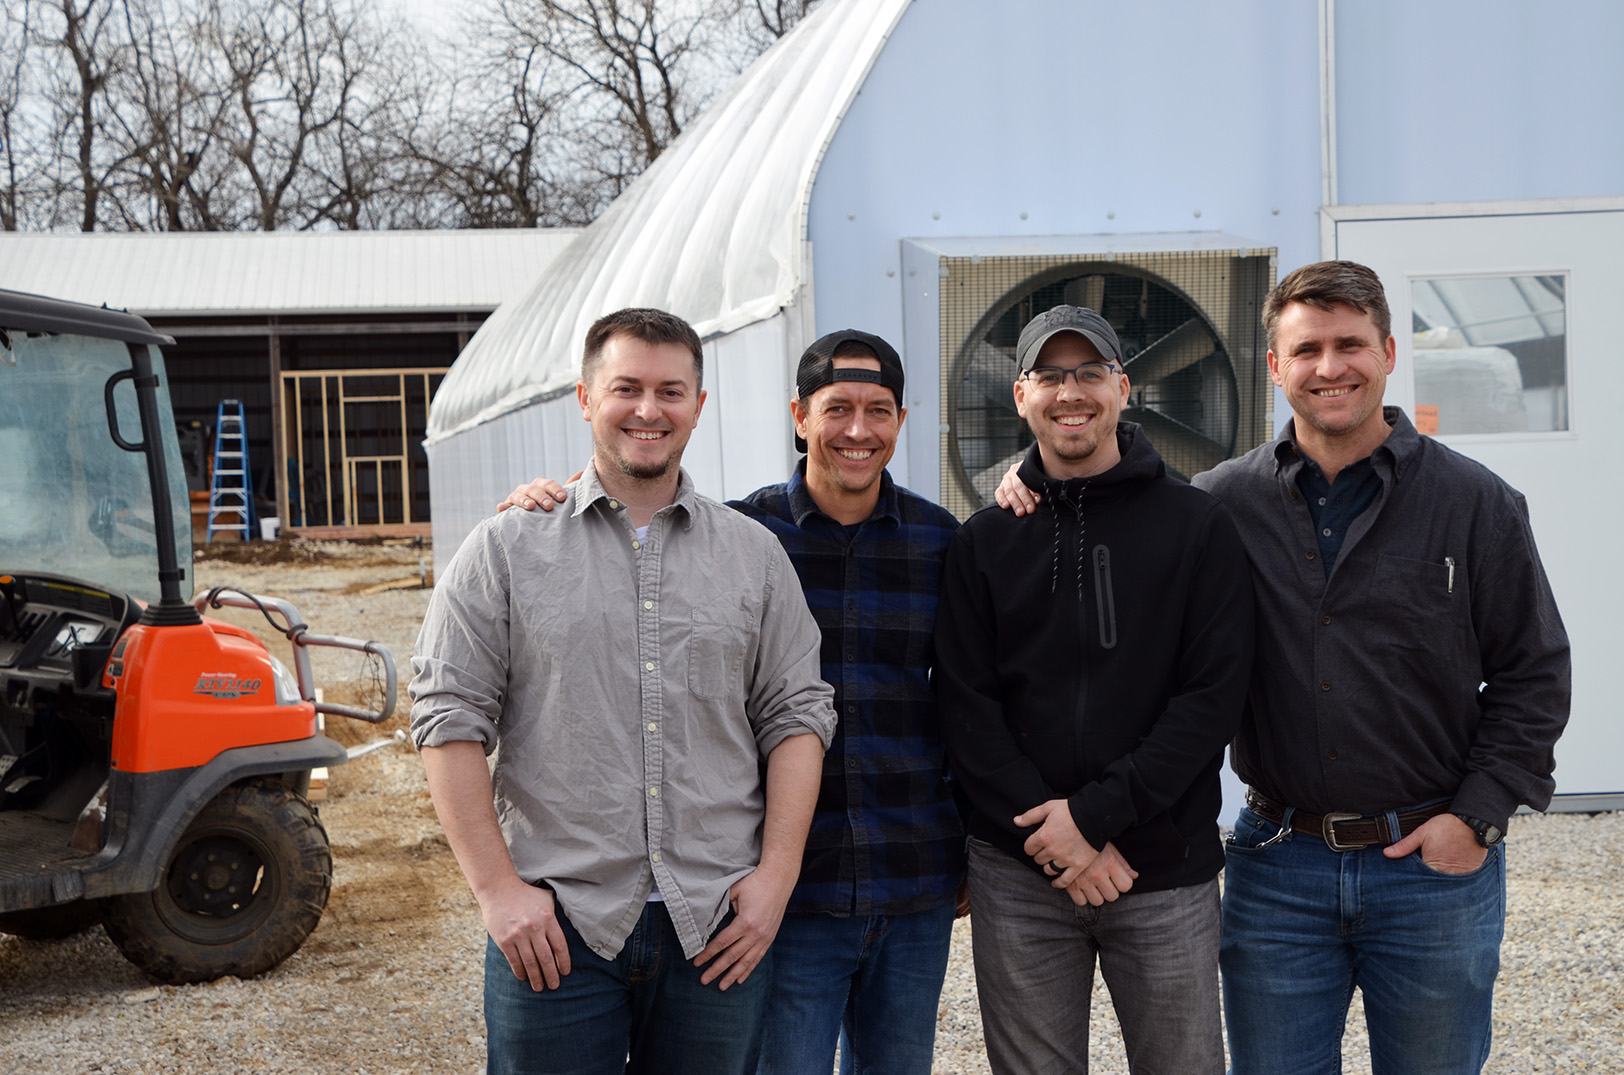 2020 Startups to Watch: United American Hemp aims for 'perpetual harvest' with Midwestern nice